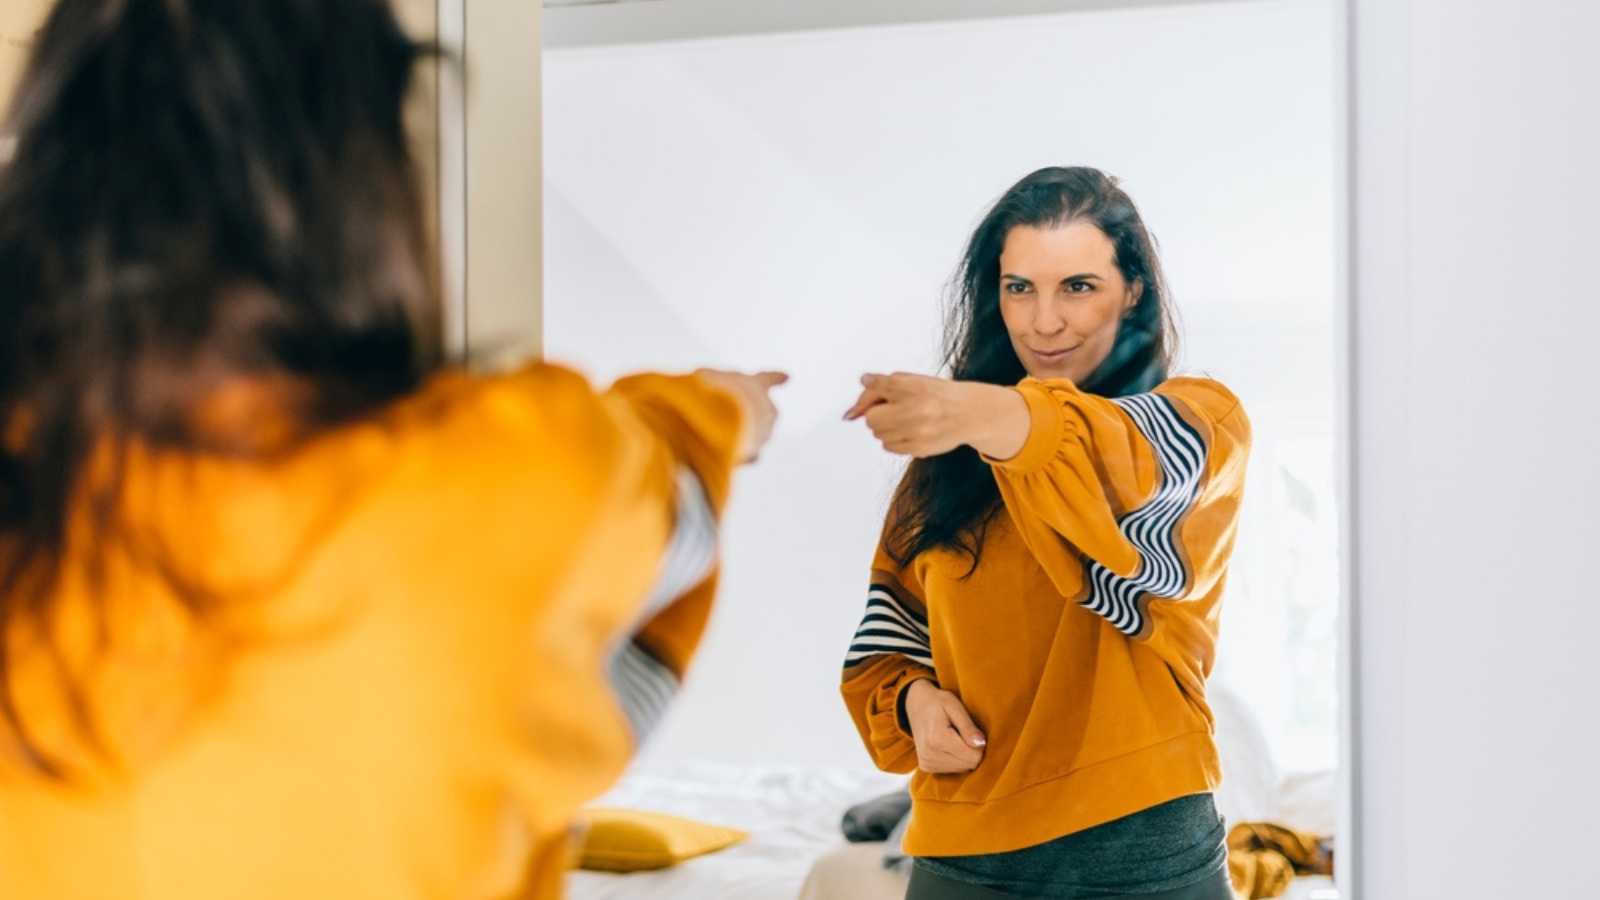 Woman pointing hands at her in mirror